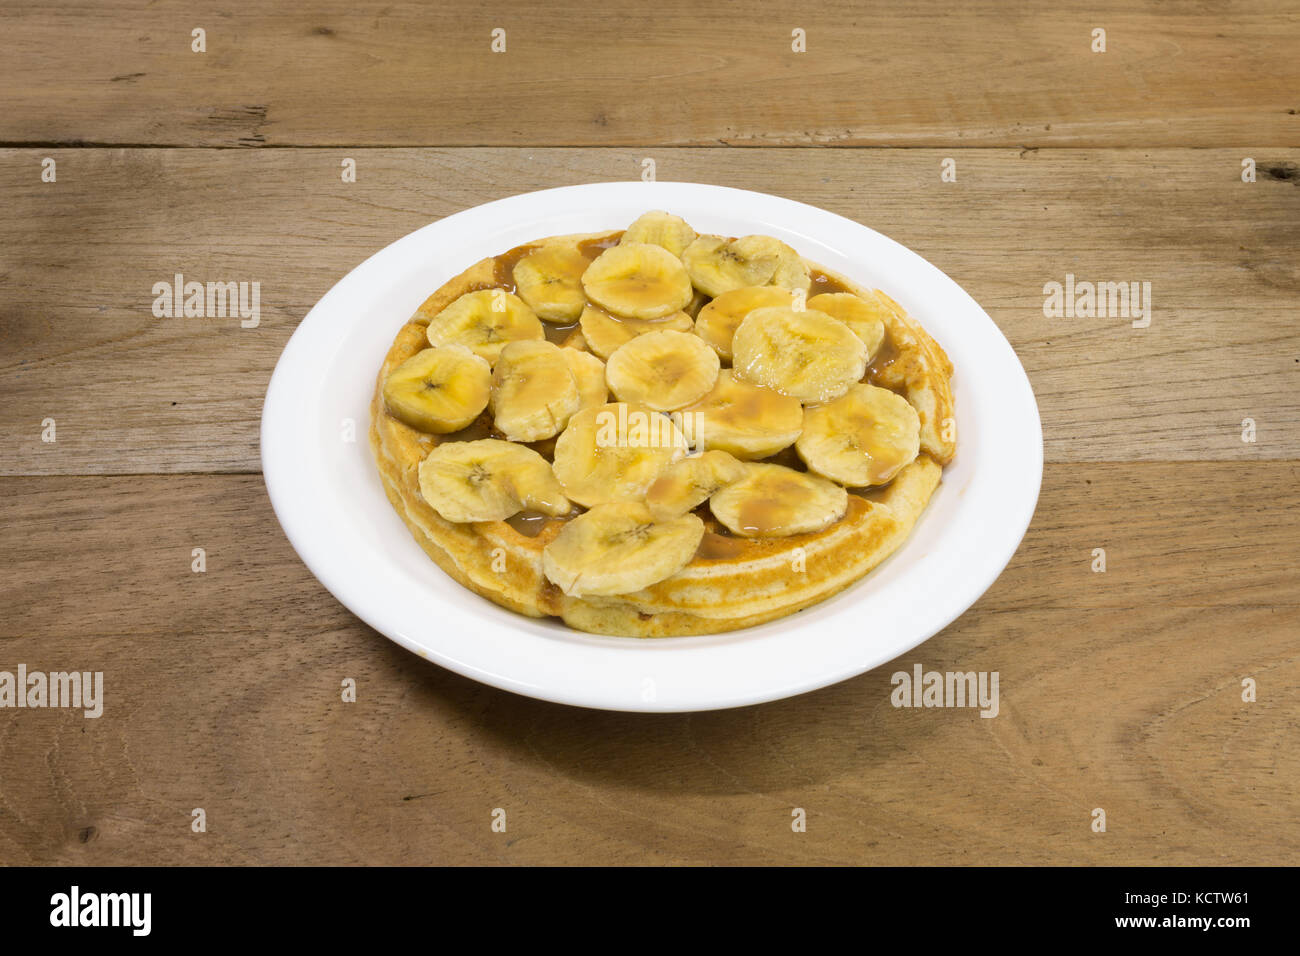 Waffle with milk caramel spread (Spanish: Dulce de leche) and banana slices on white plate, on wooden background Stock Photo